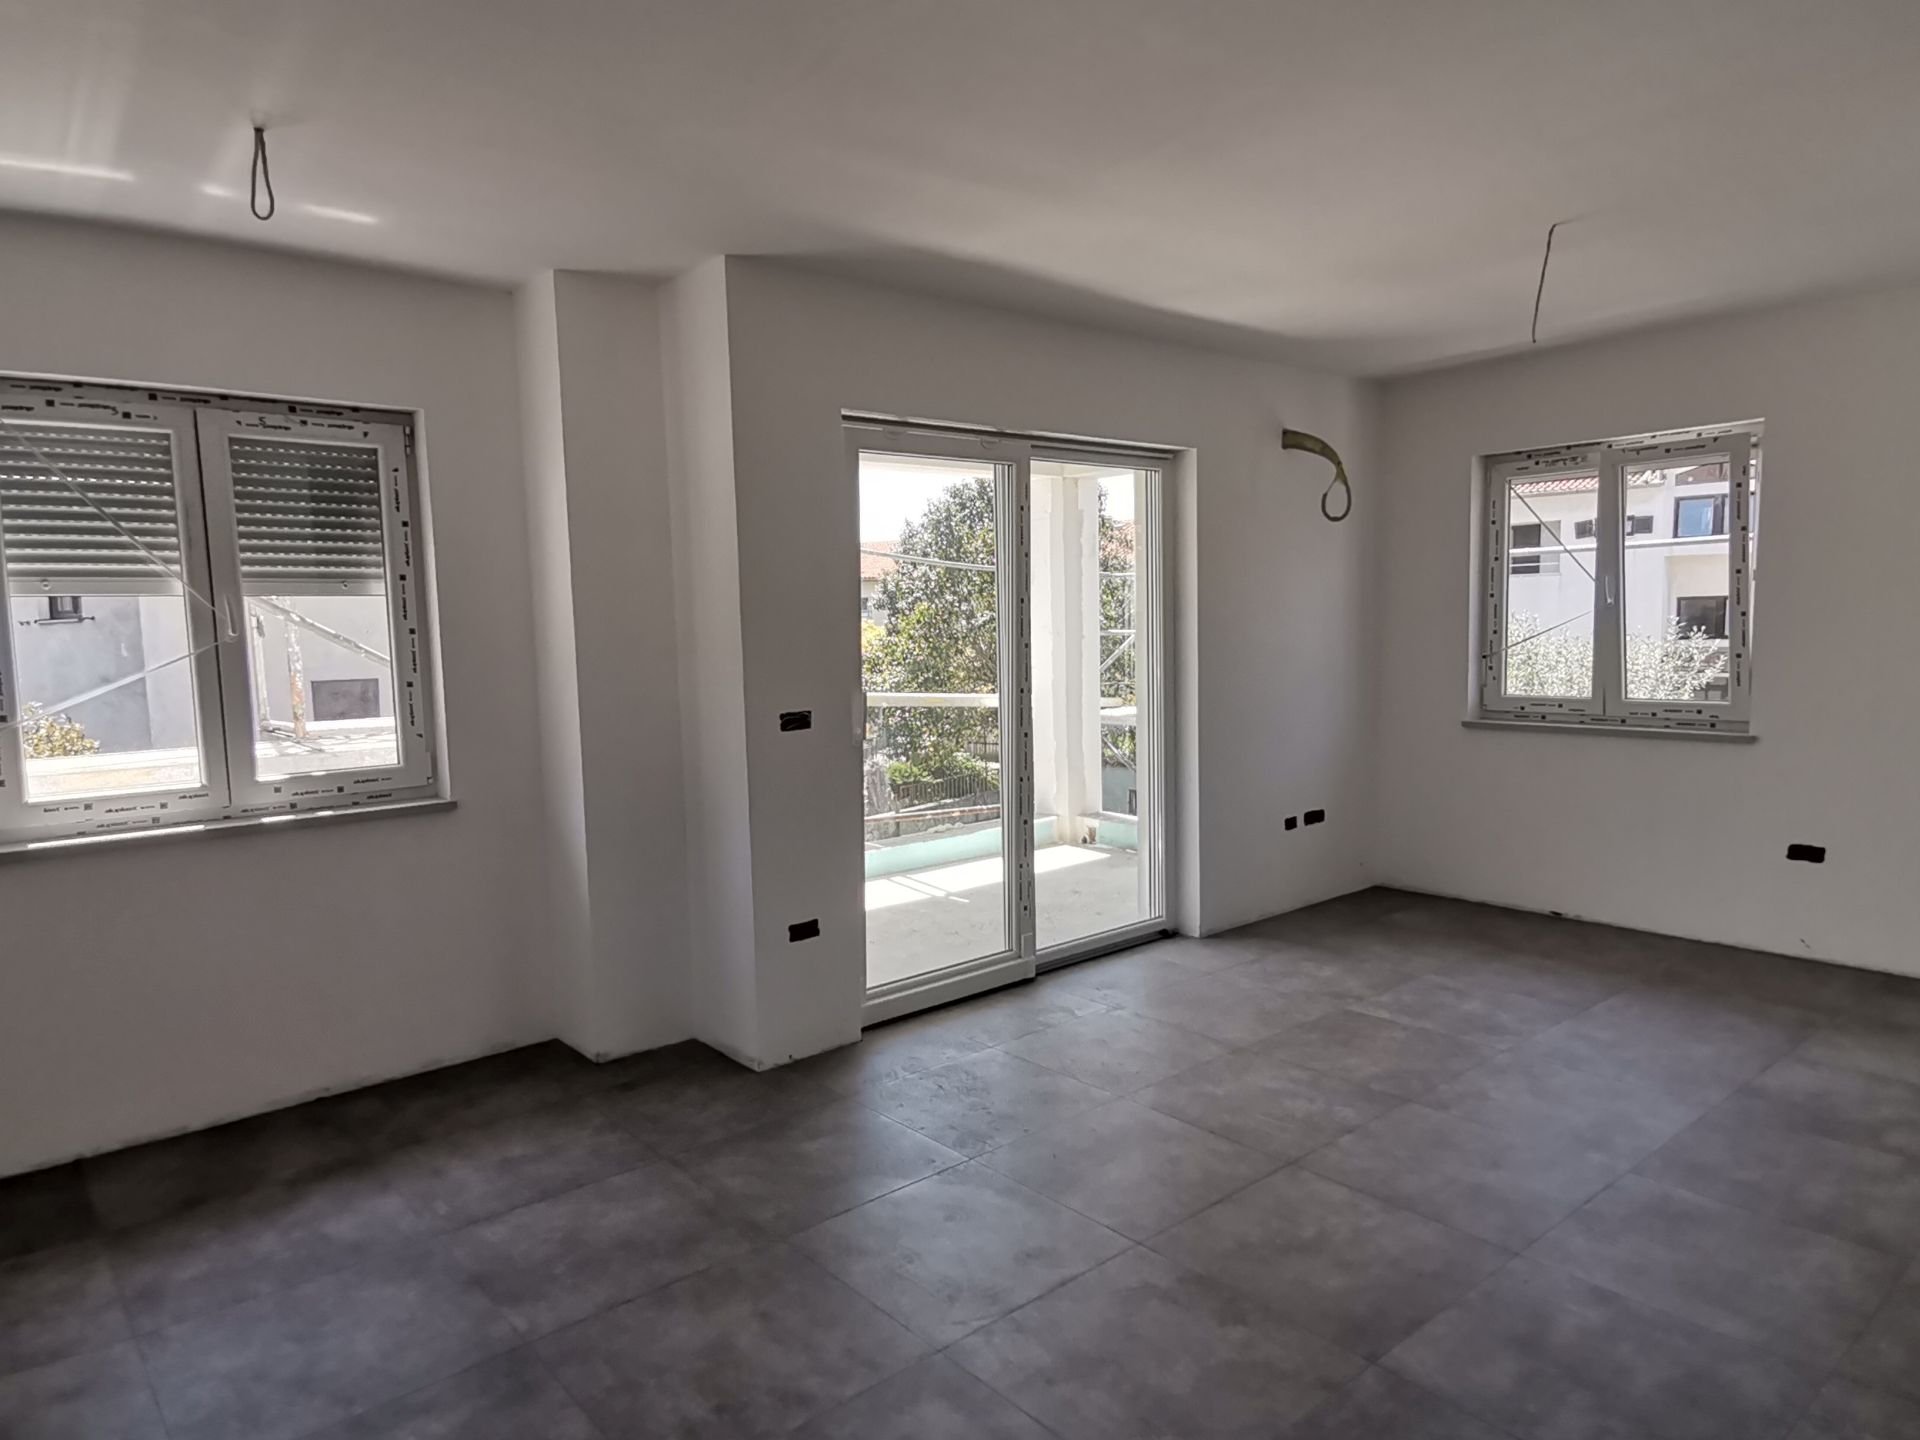 P-279 Apartment for sale in a new building of 66.33 m² on the 1st floor in a quiet neighborhood in Poreč.